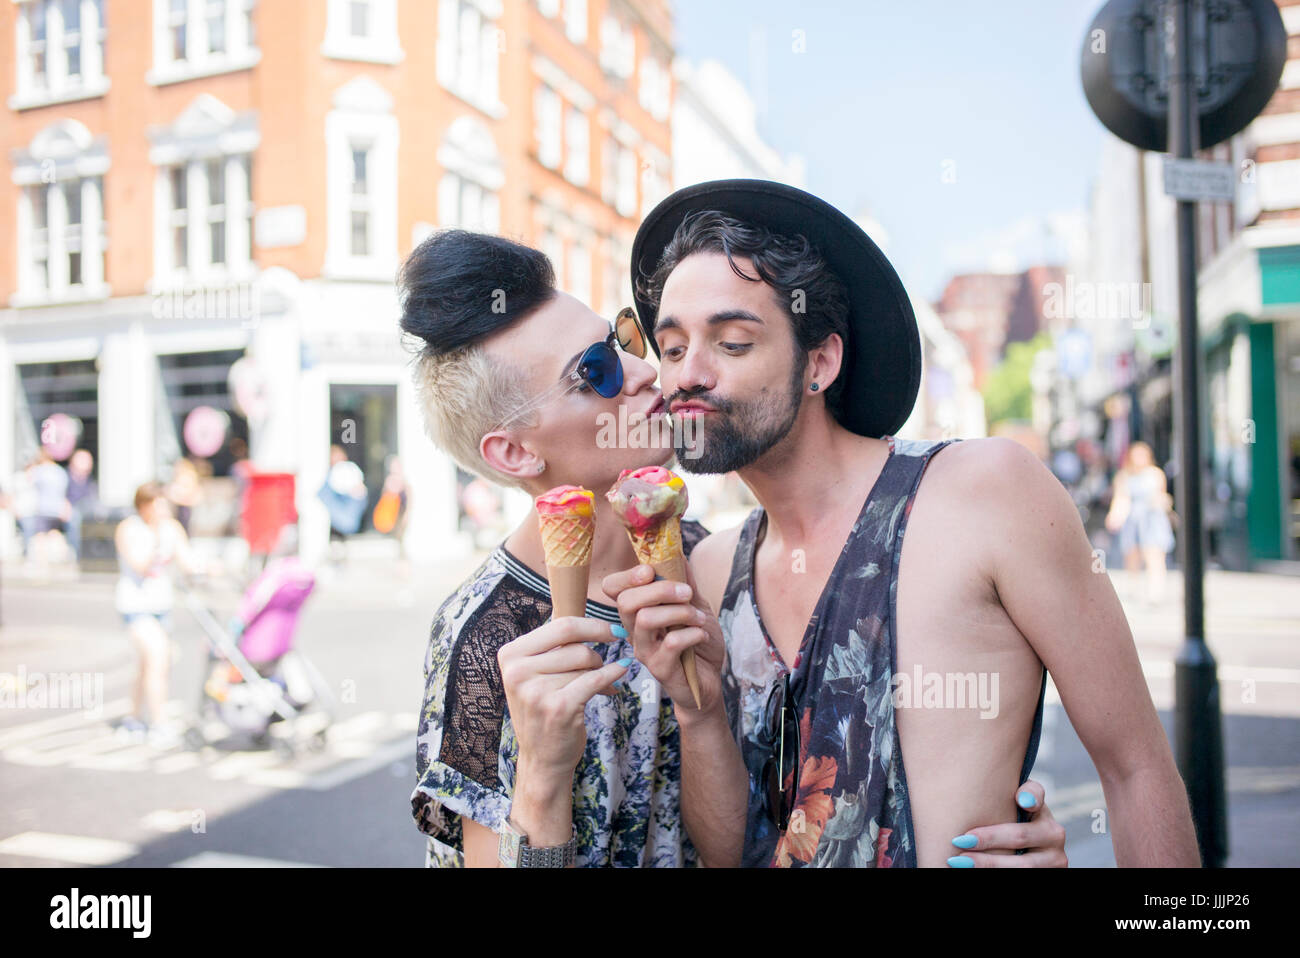 A gay couple enjoy an ice cream on a day out in London. Stock Photo